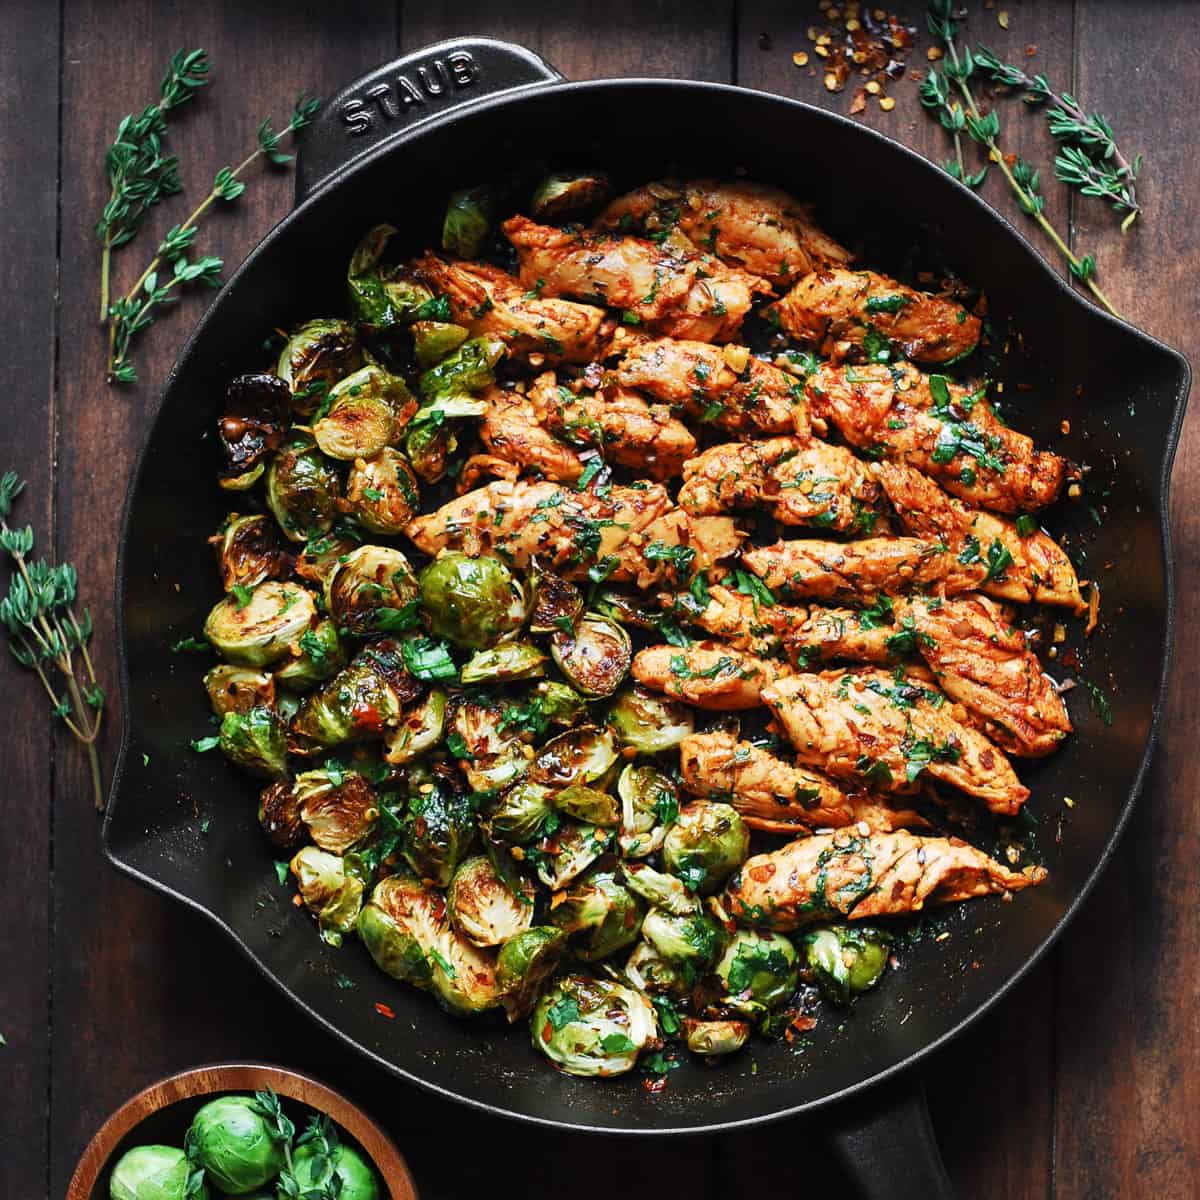 lemon garlic butter chicken and Brussels sprouts in a cast-iron skillet